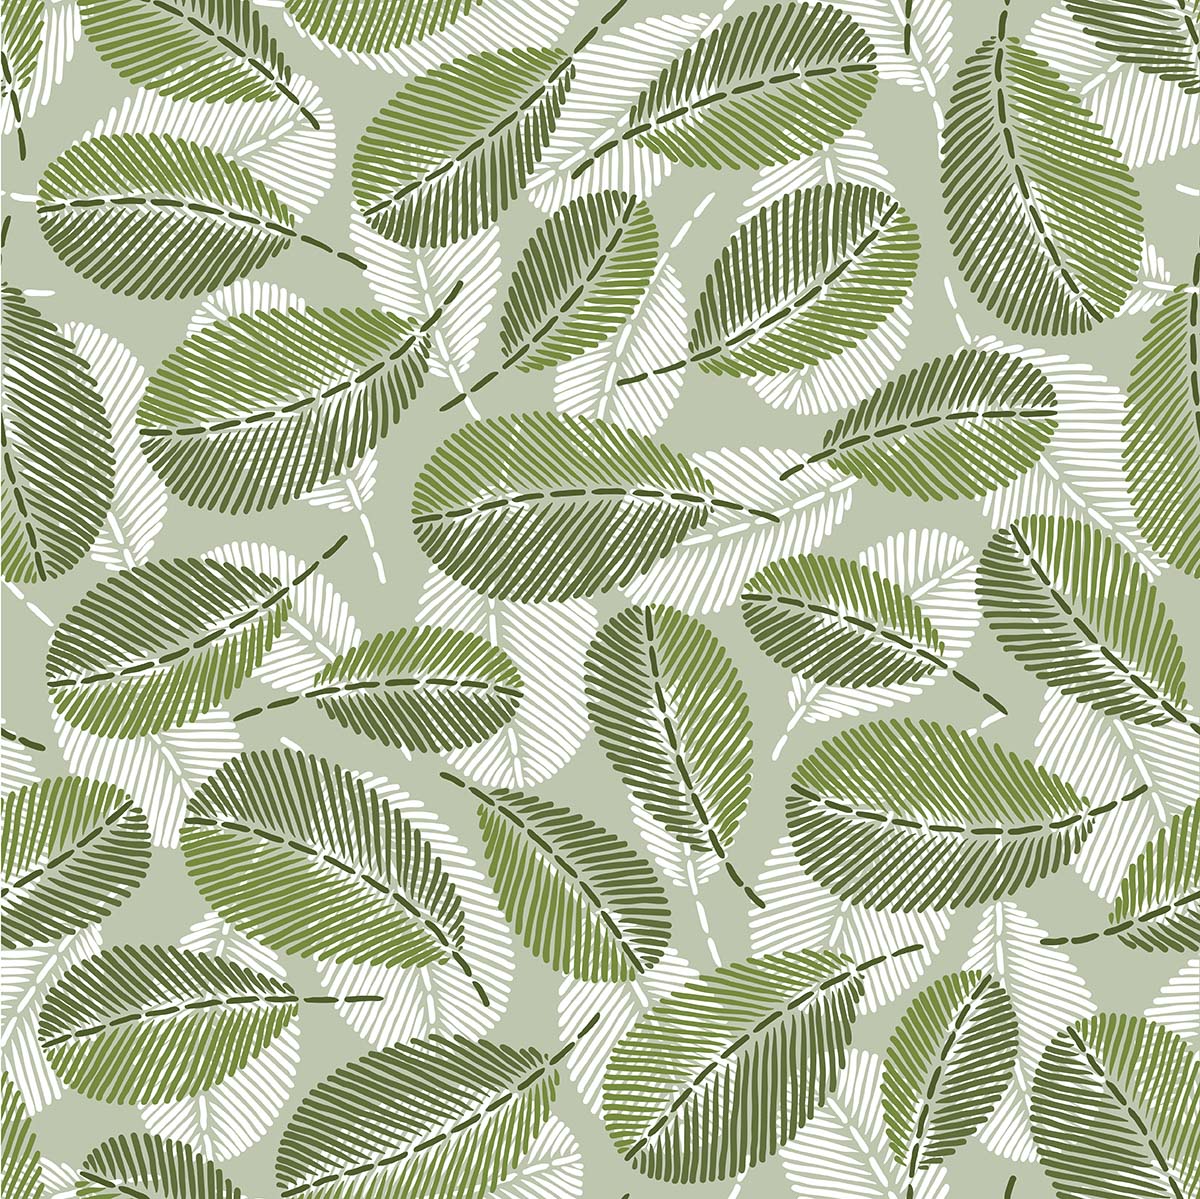 A pattern of green and white leaves